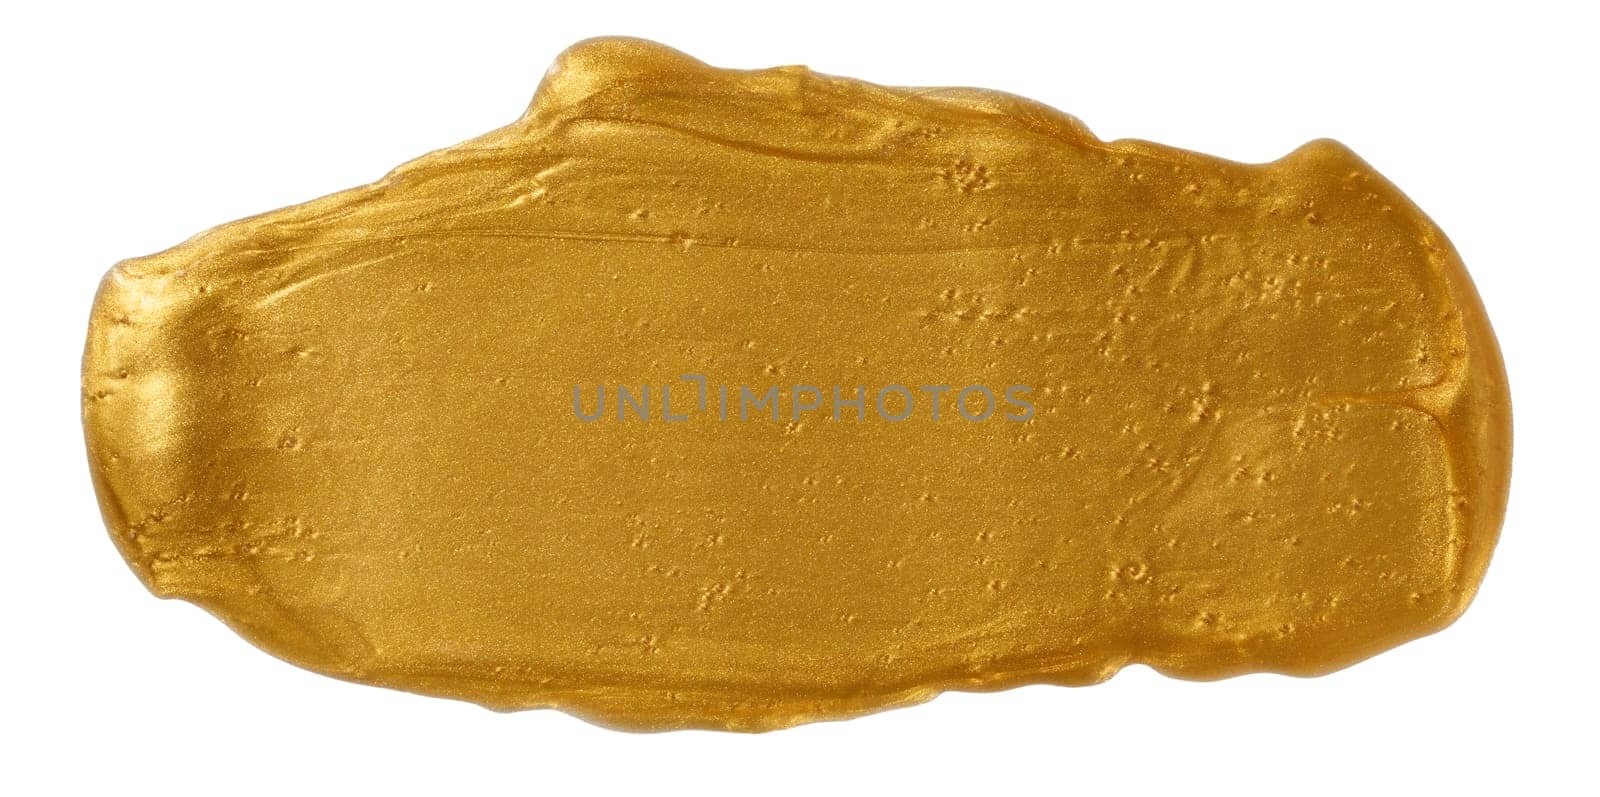 Sample of gold glitter gel with small particles isolated on white background, texture of cosmetic products like highlighter, lipstick, and blush